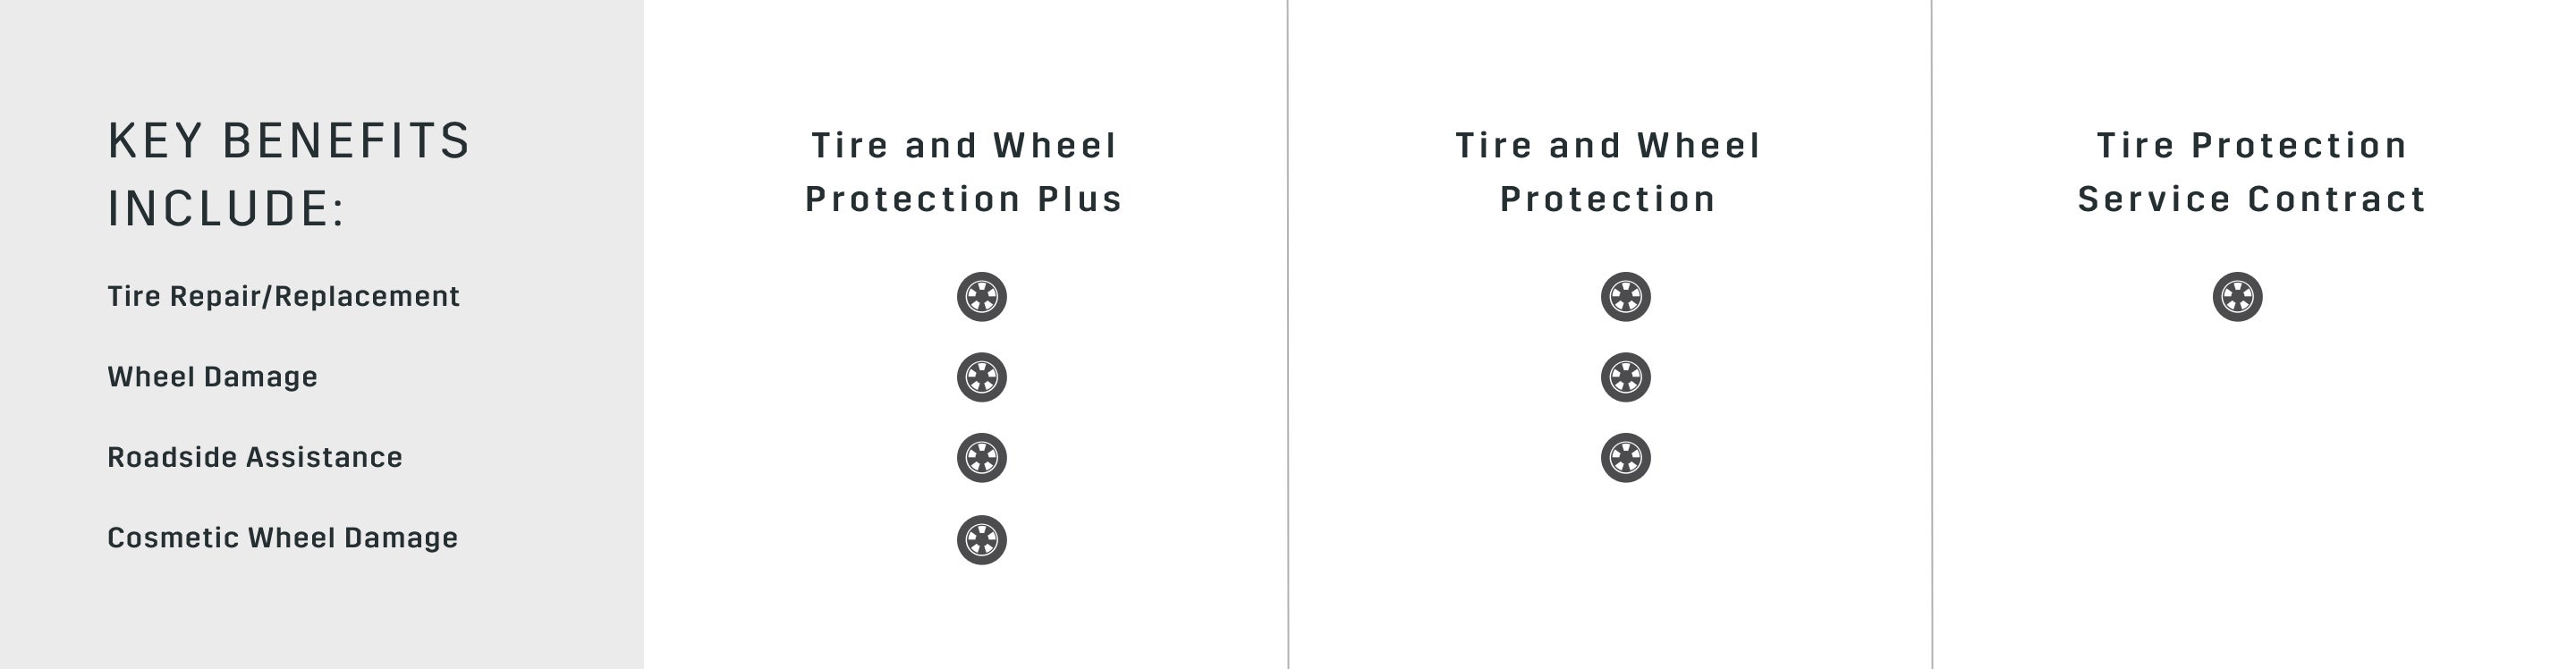 Cadillac Protection Tire and Wheel Protection Key Benefits Chart